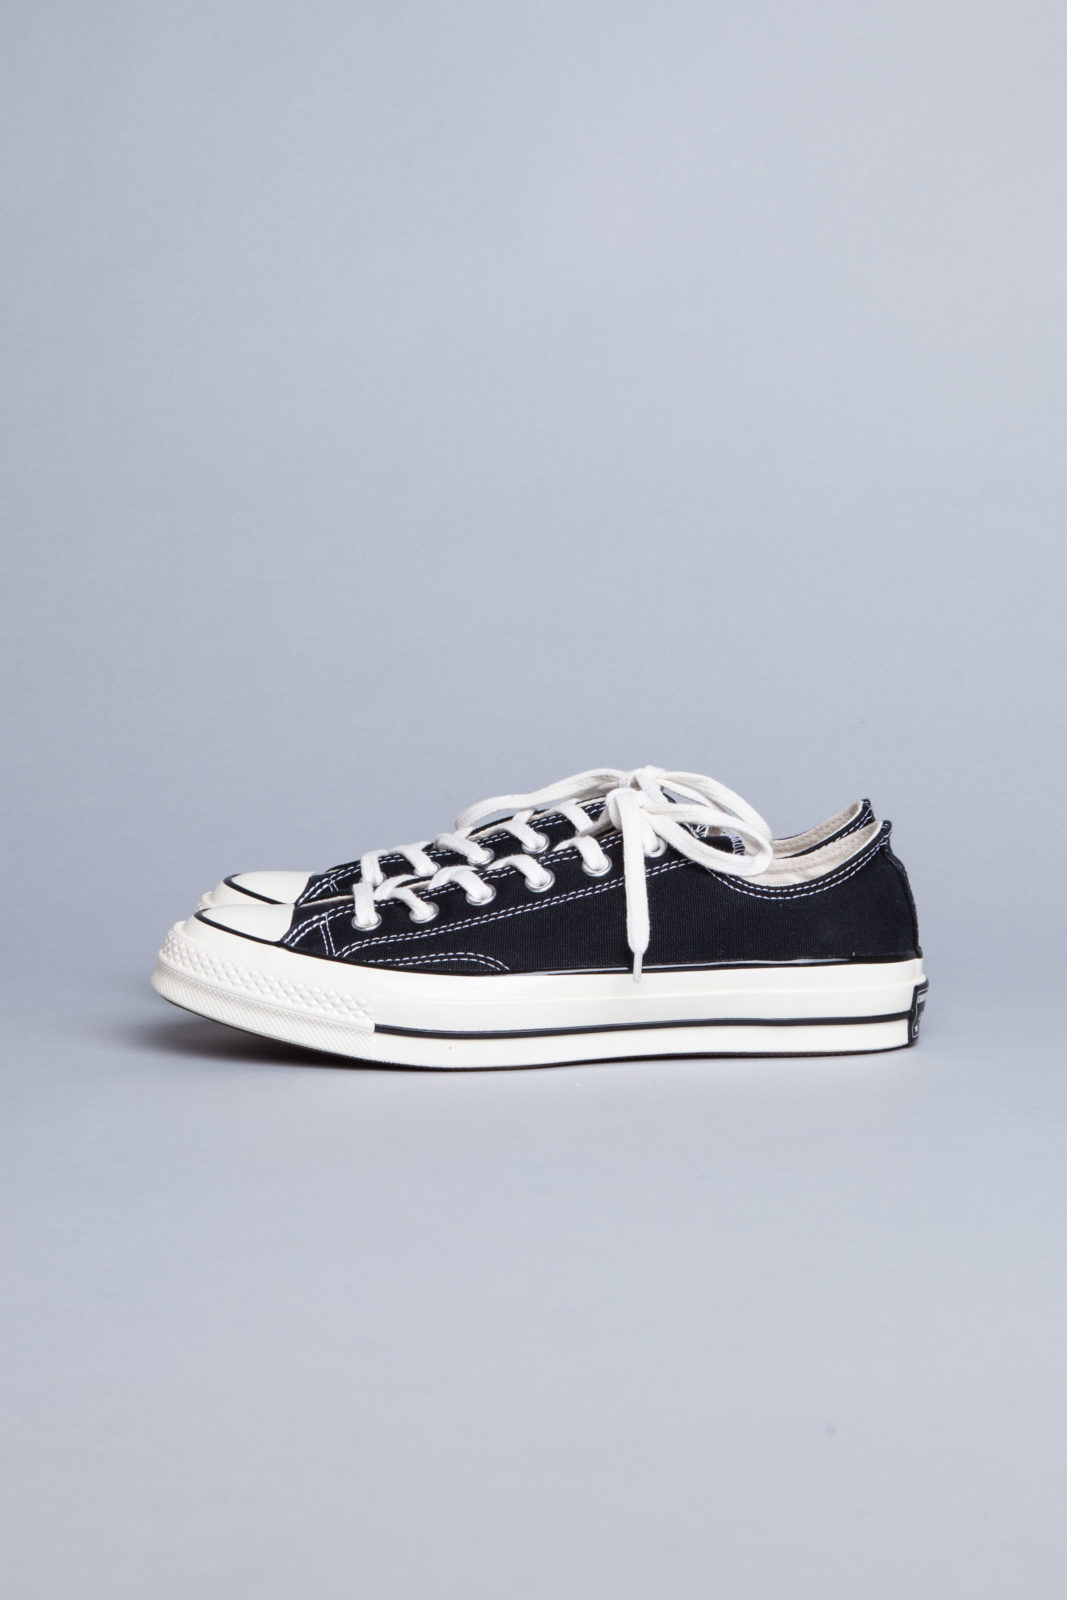 converse 1970's chuck taylor low ox